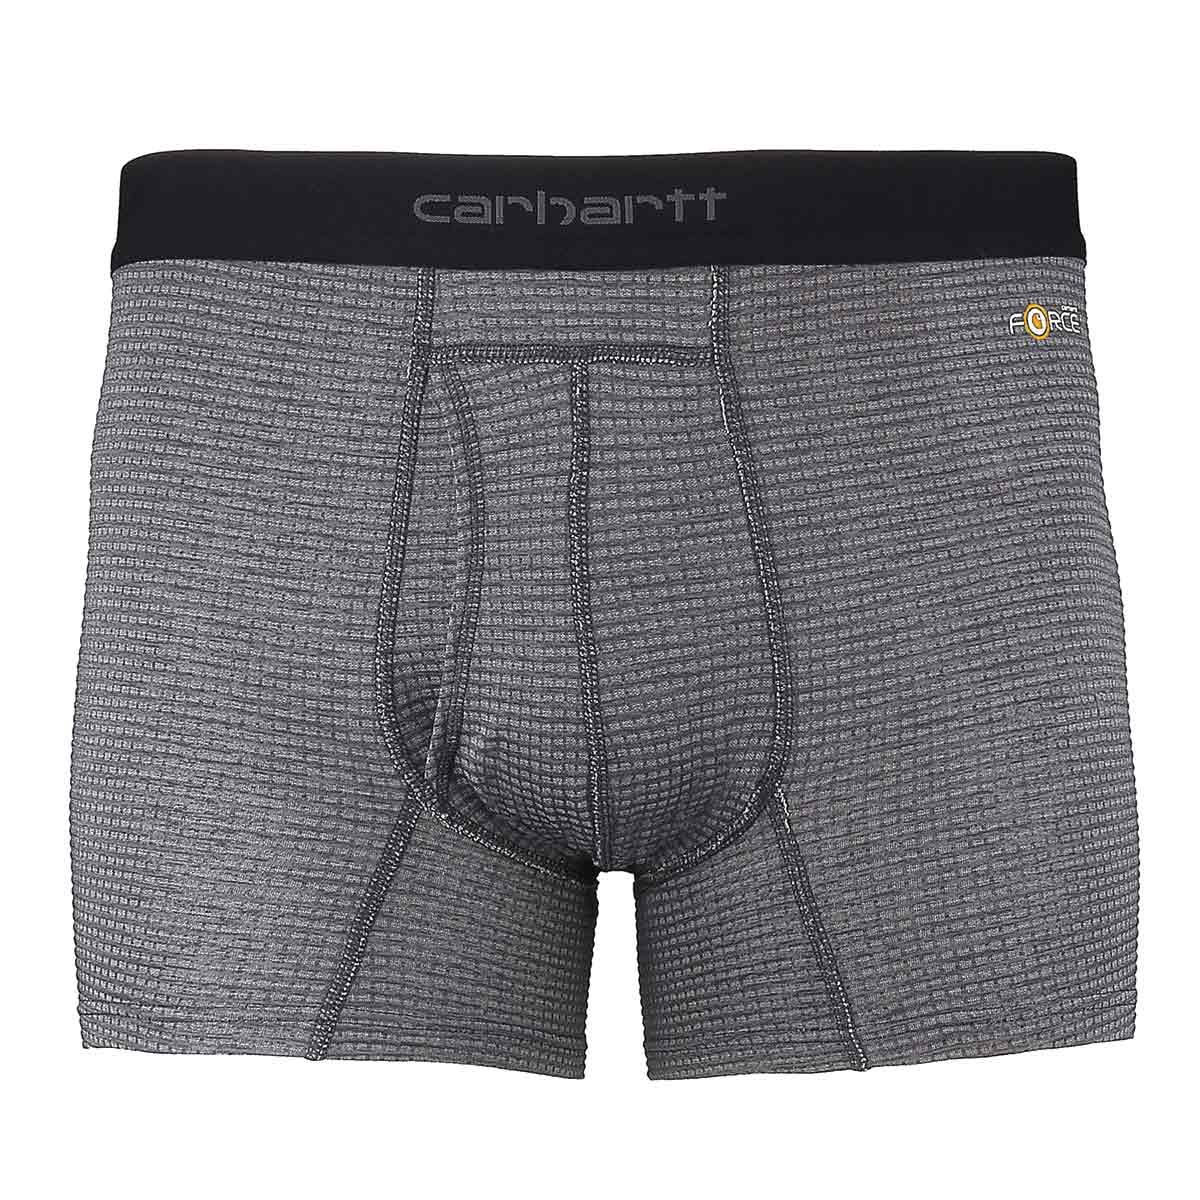 Carhartt Base Force 5 Inch Boxer Brief